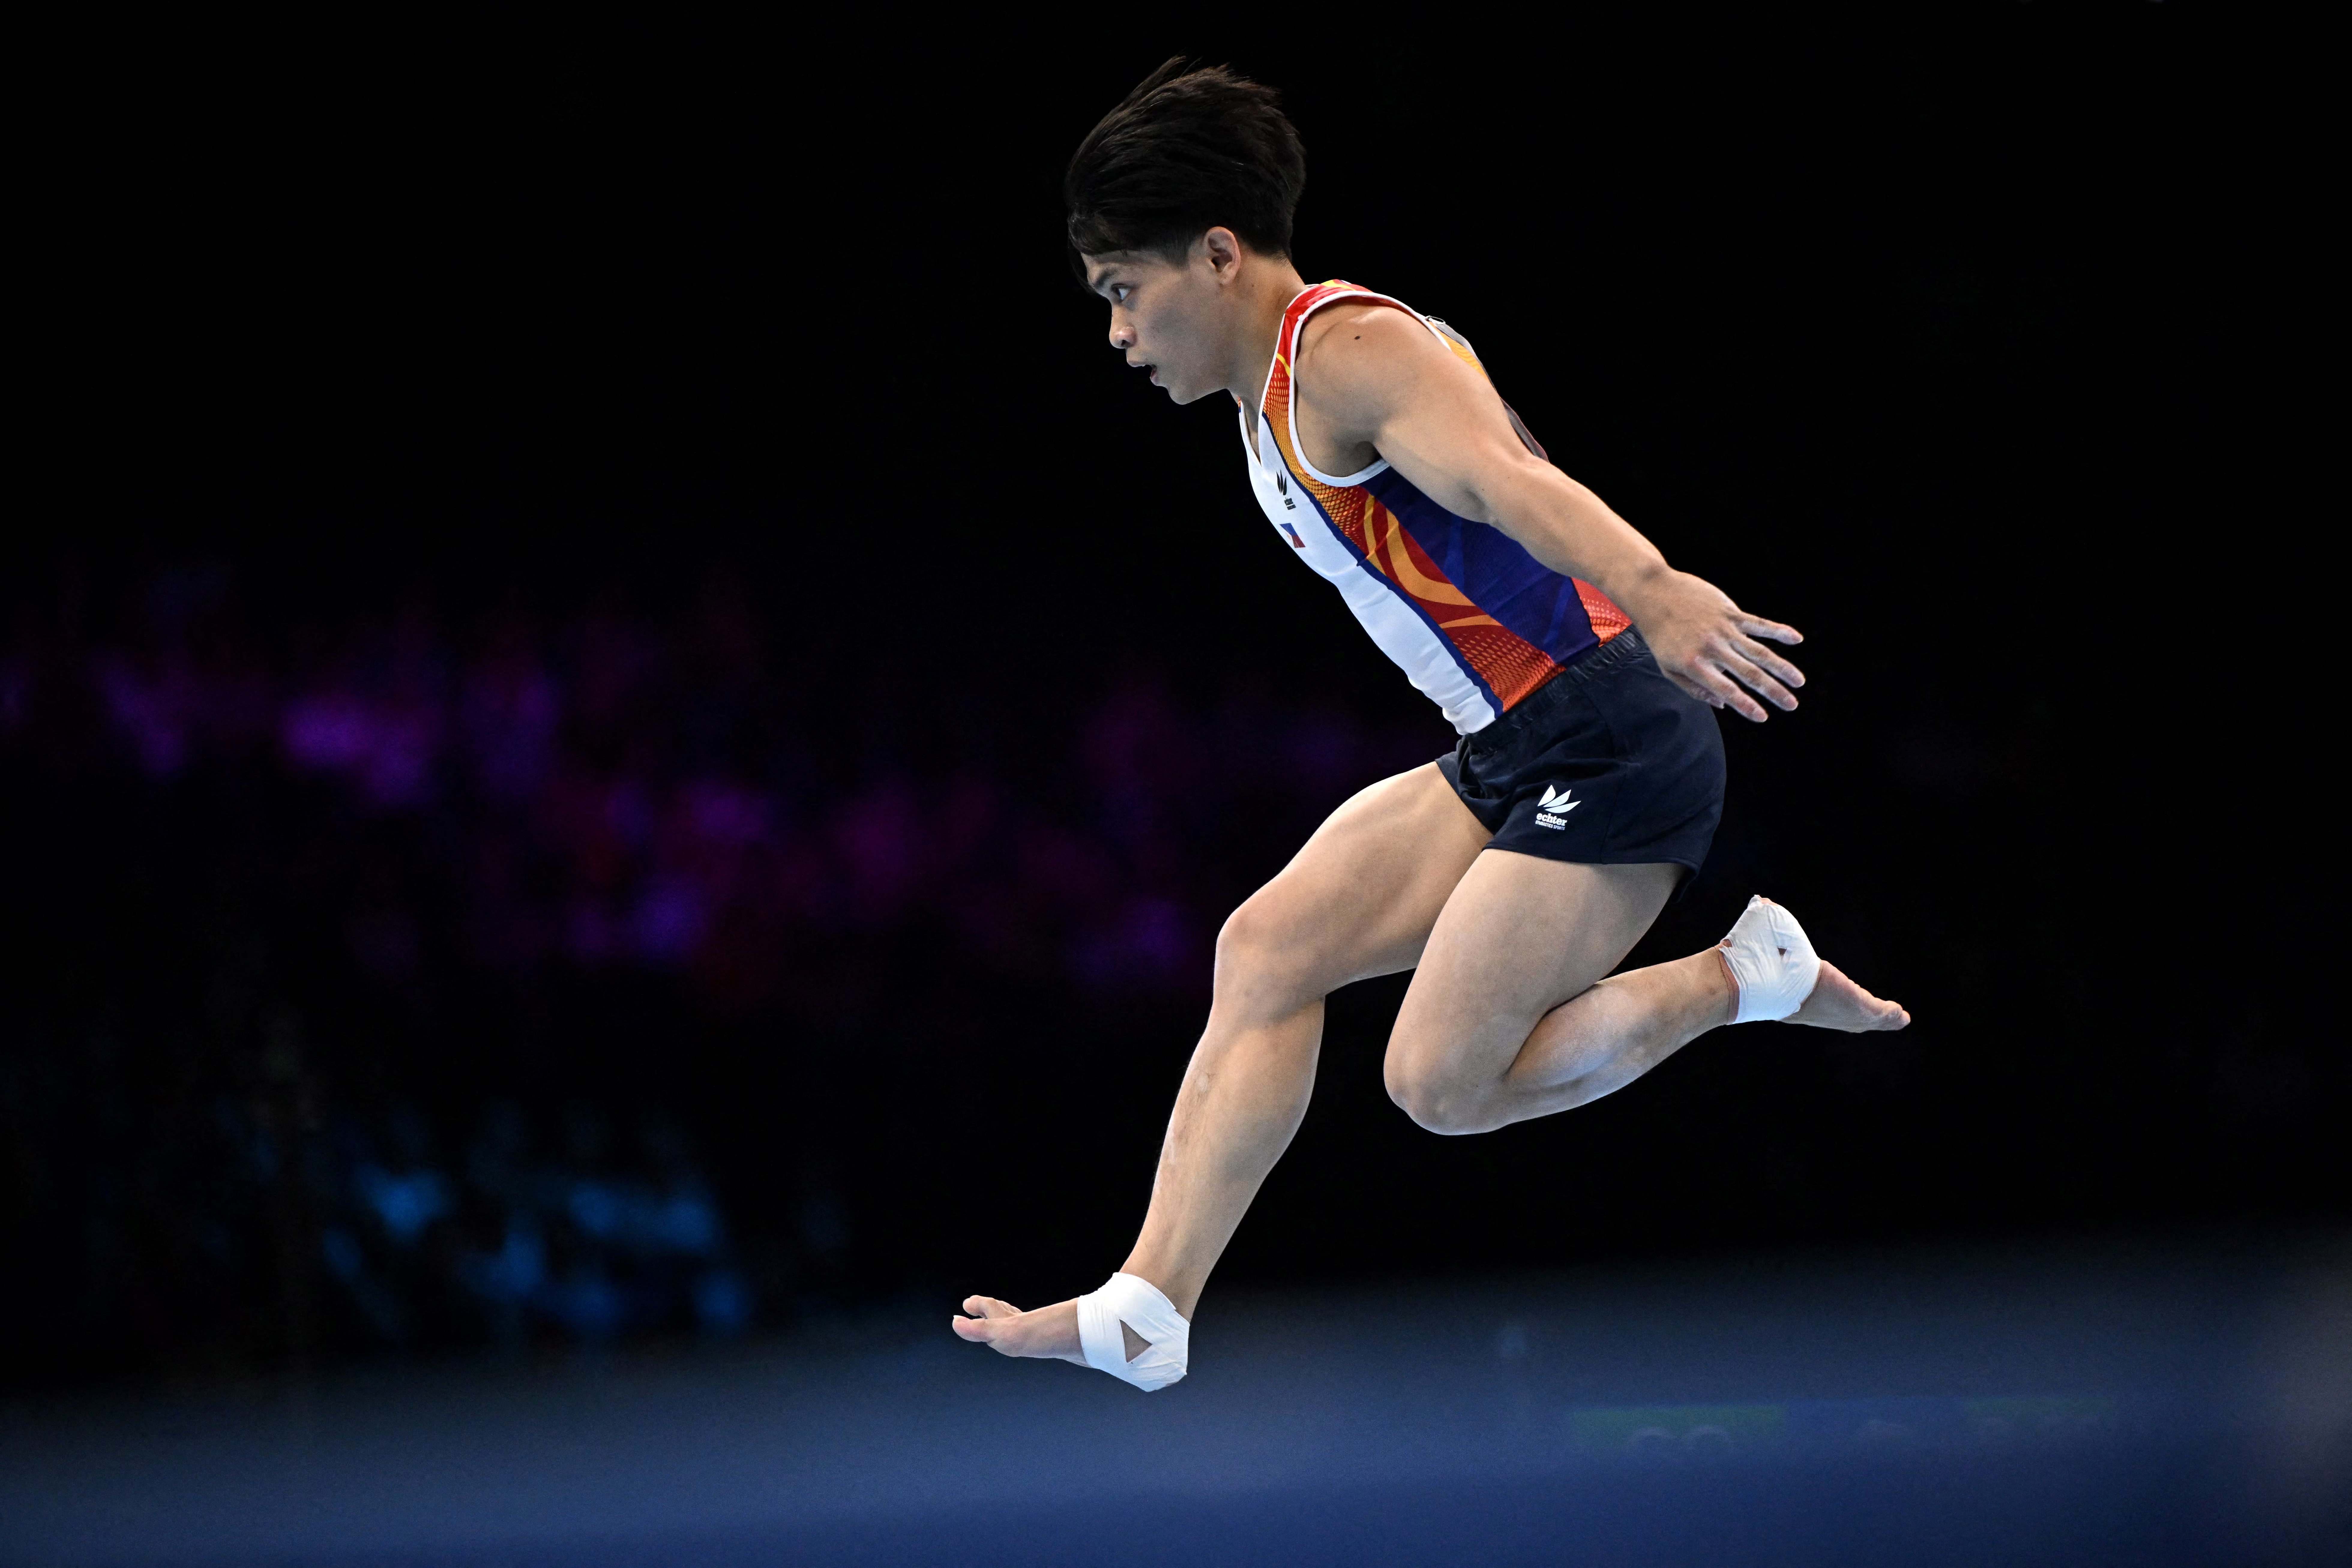 Carlos Yulo wins elusive all-around gold at Asian Championships